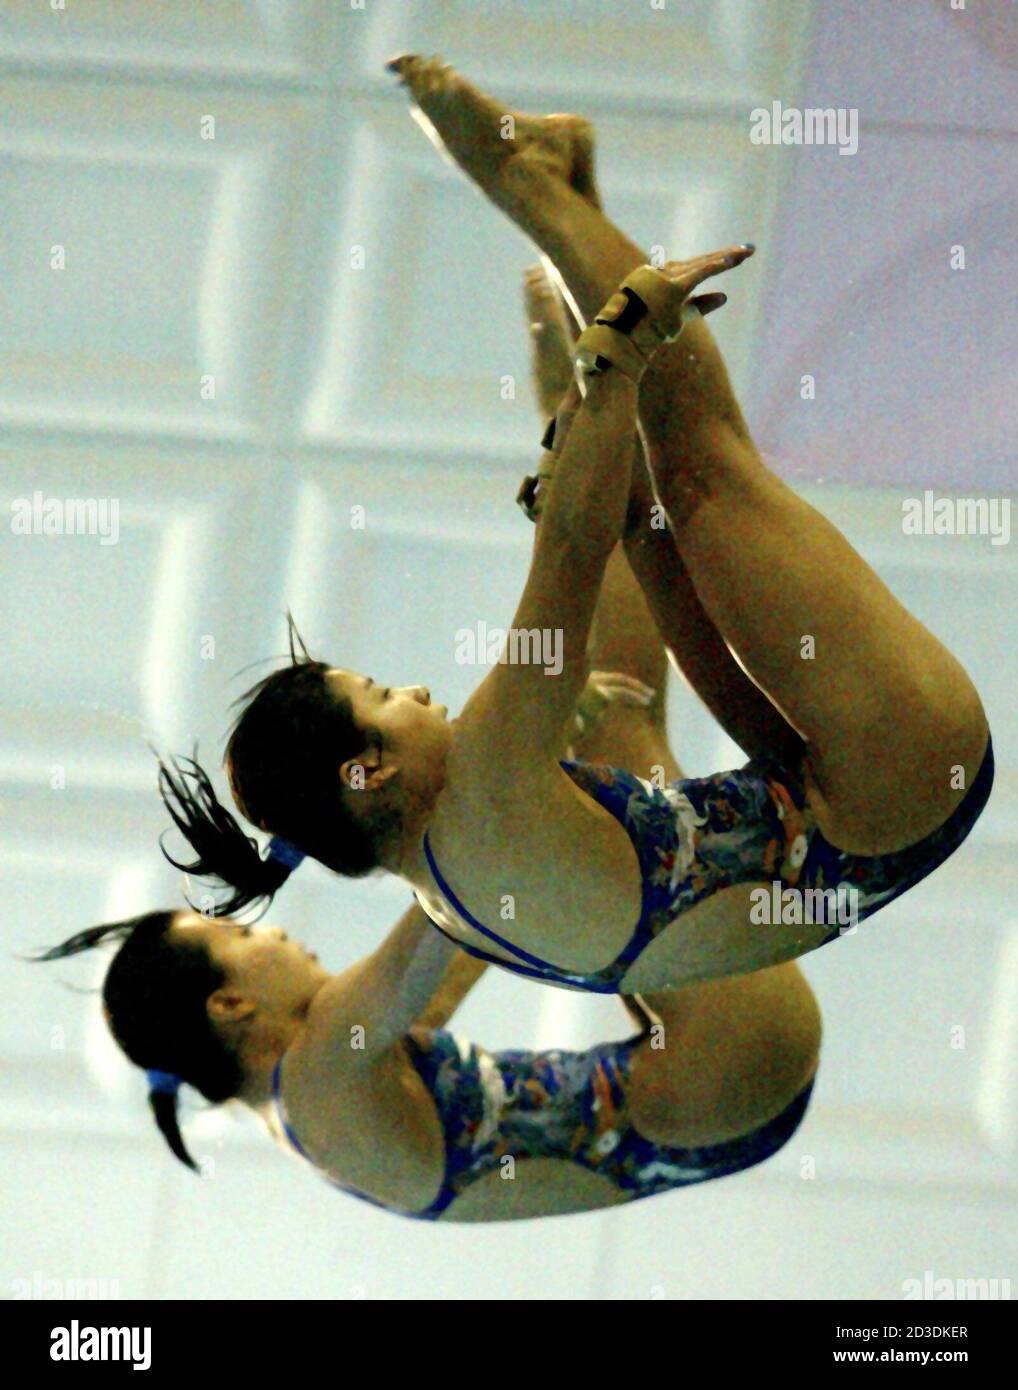 Japan's Takiri Miyazaki (front) and partner Emi Otsuki perform in the women's 10-metre platform synchronized diving final at the 14th Asian Games in Pusan, South Korea, October 9, 2002. The Japanese pair won the bronze medal behind gold medalist China and silver medalist North Korea. REUTERS/Bobby Yip  BY/JS Stock Photo